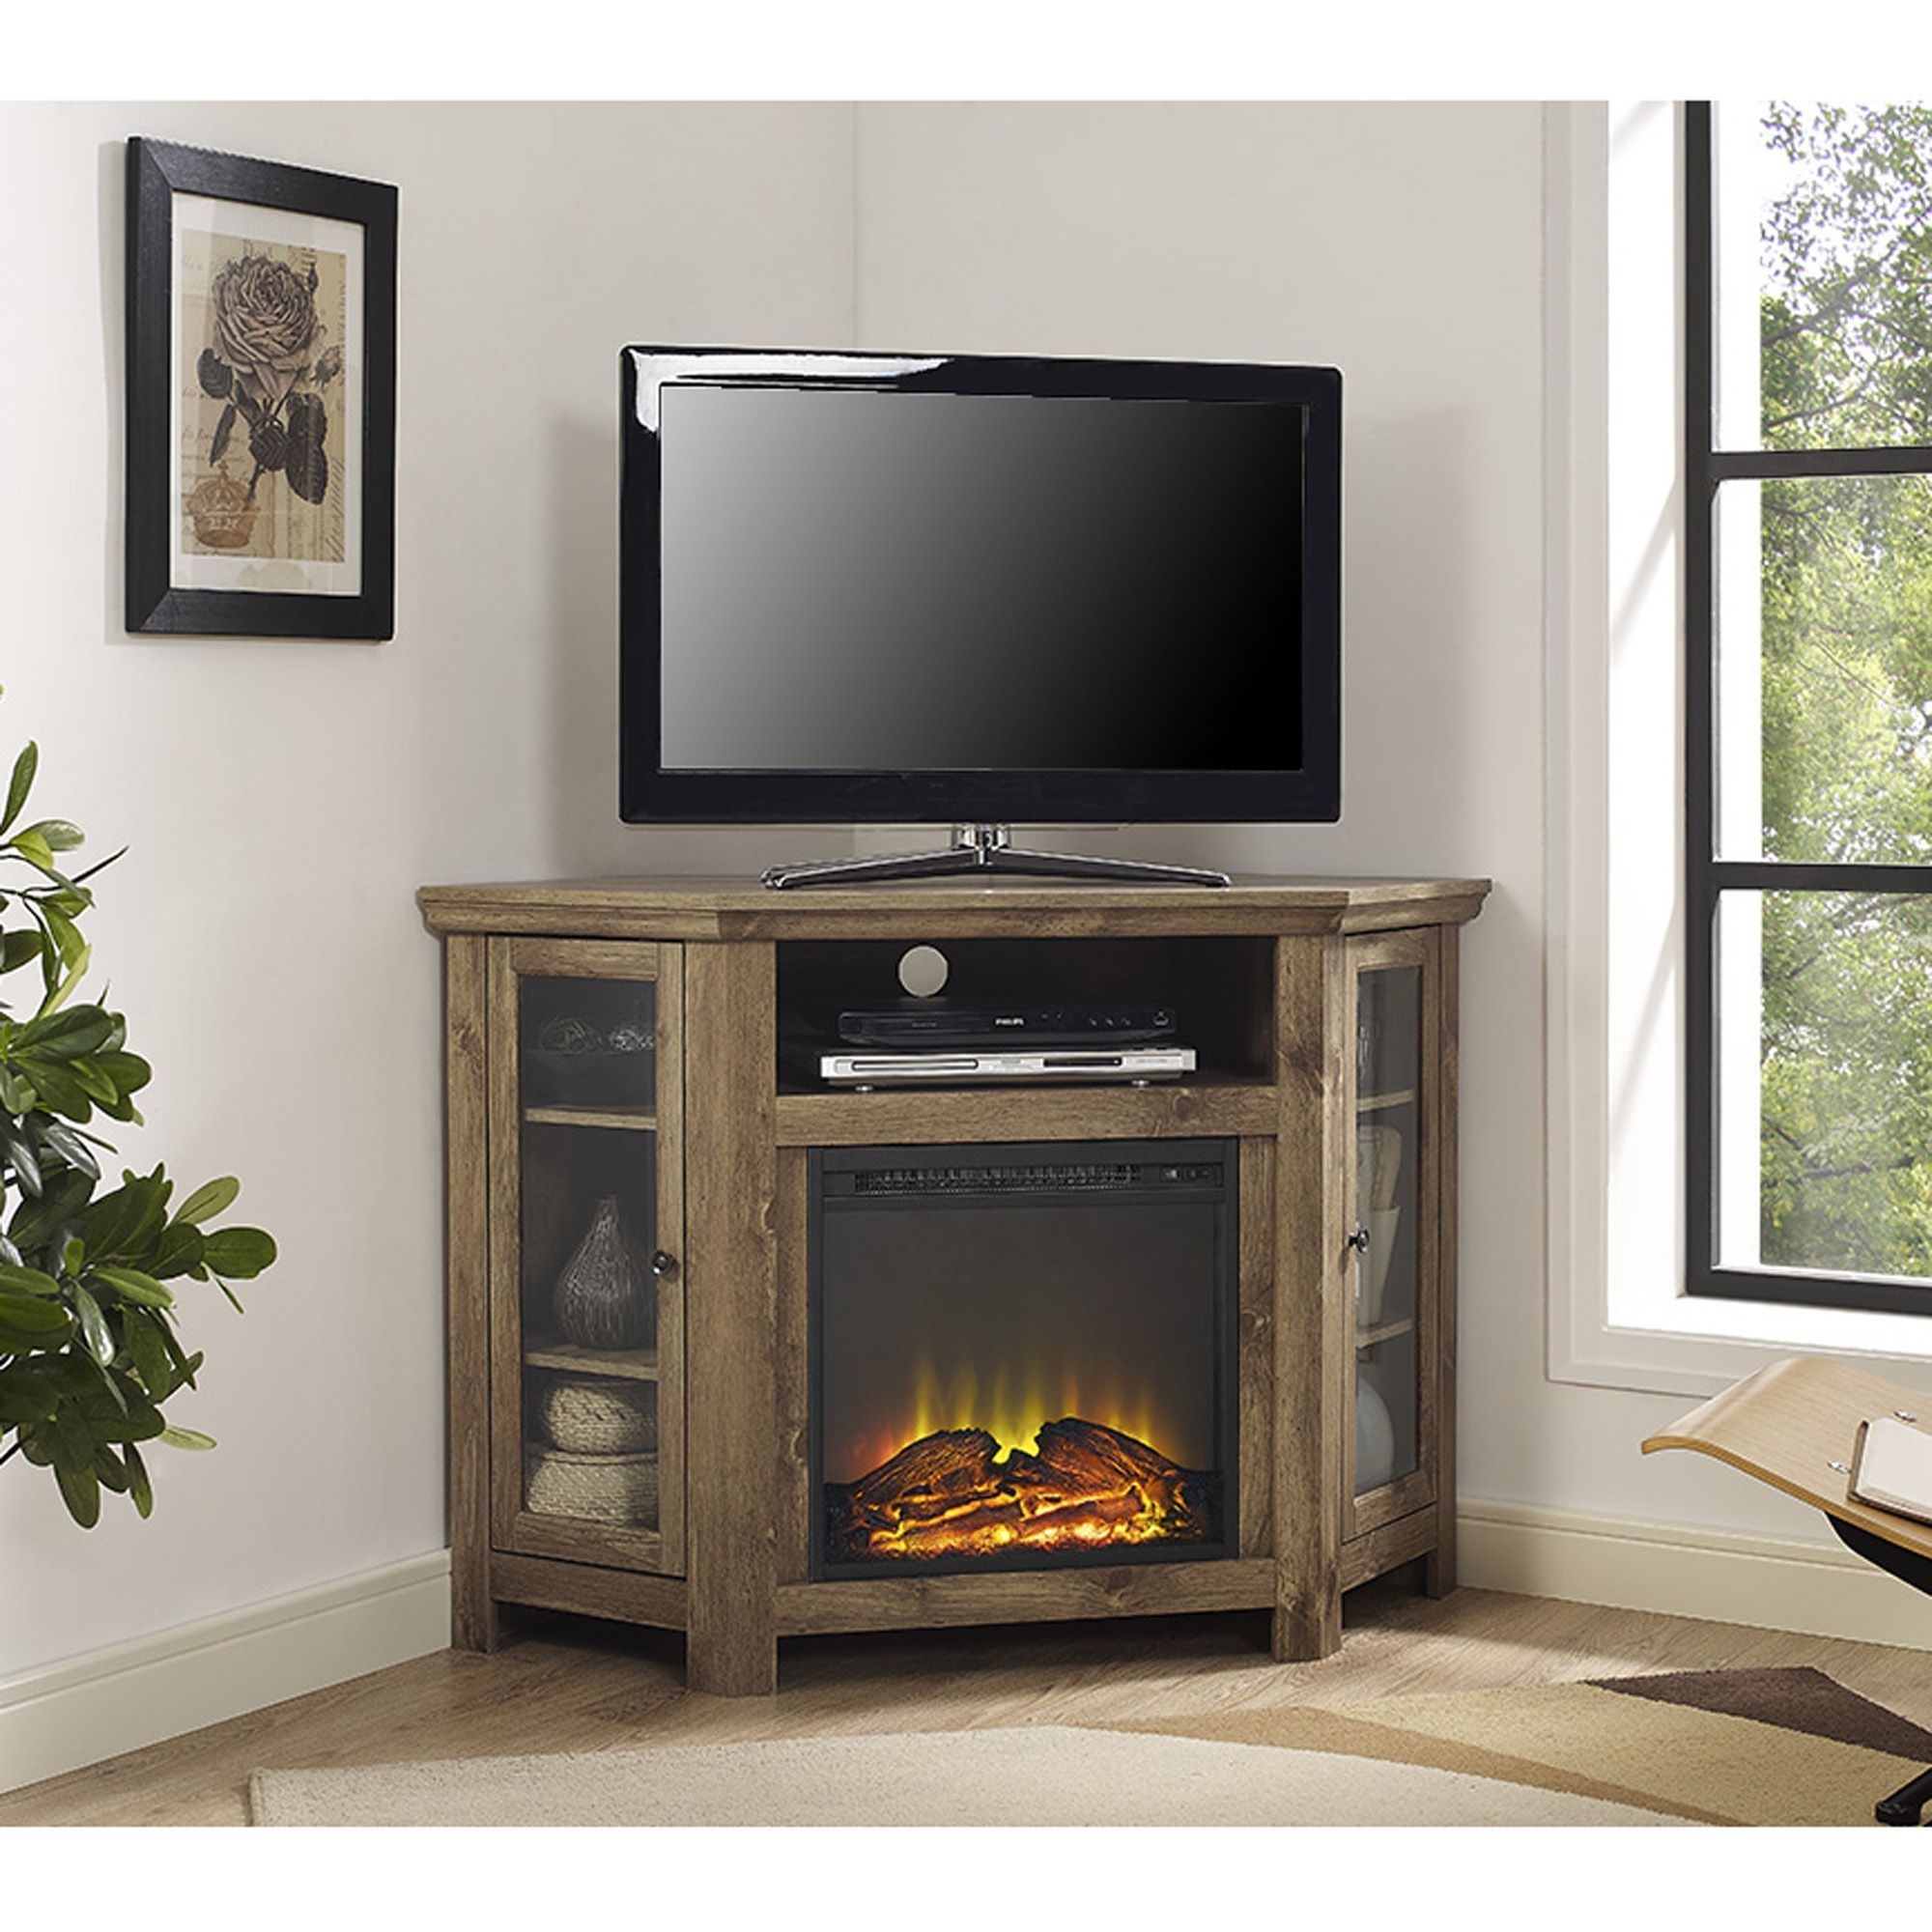 Loon peak pueblo corner tv stand with electric fireplace